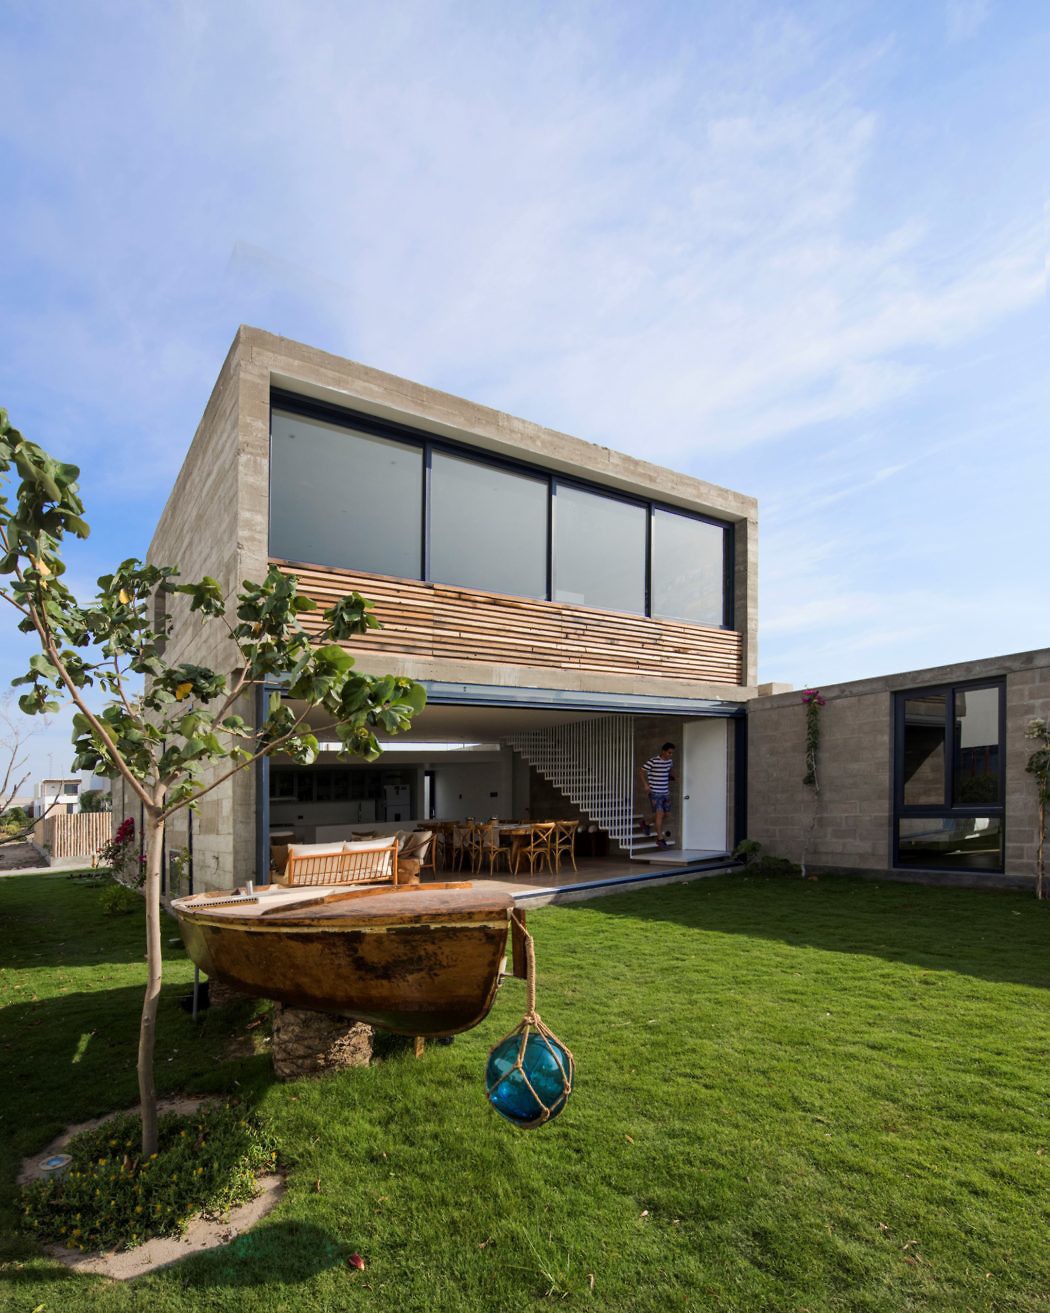 Contemporary concrete house with large windows and a wooden slat balcony.